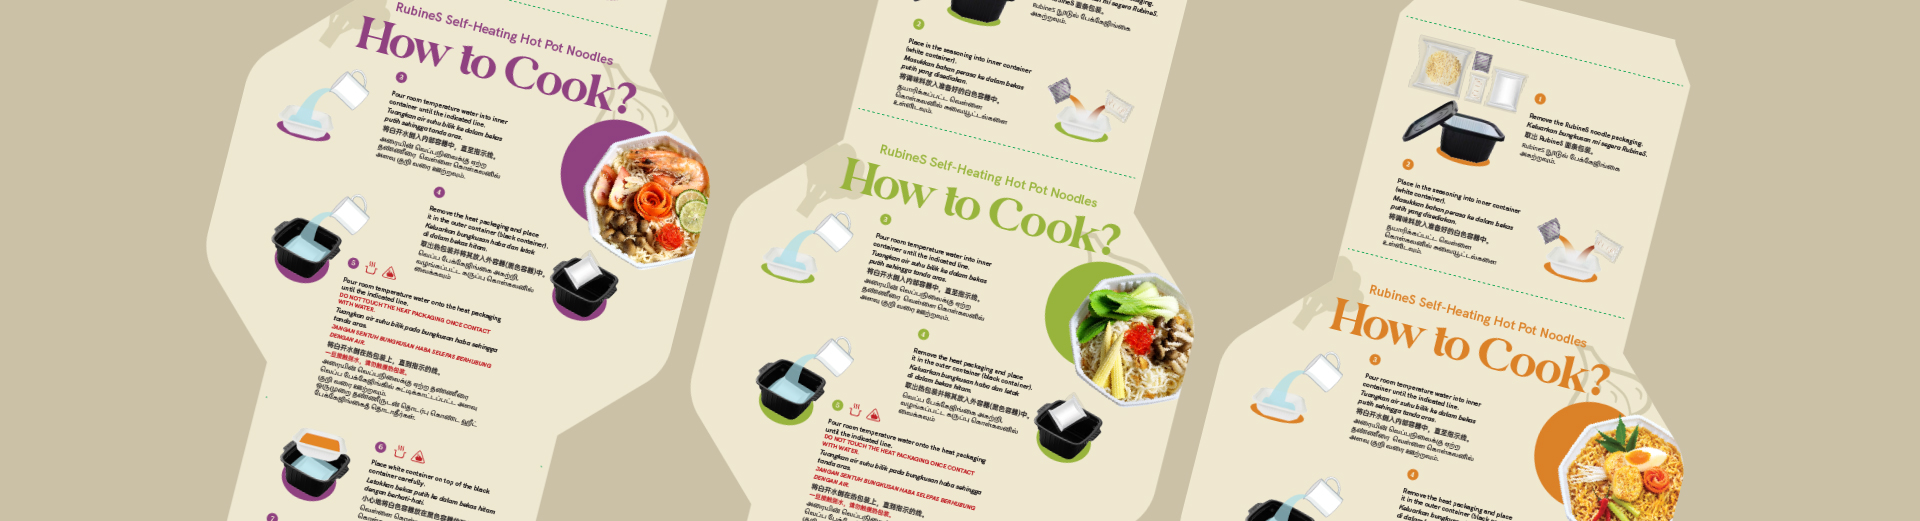 how to cook